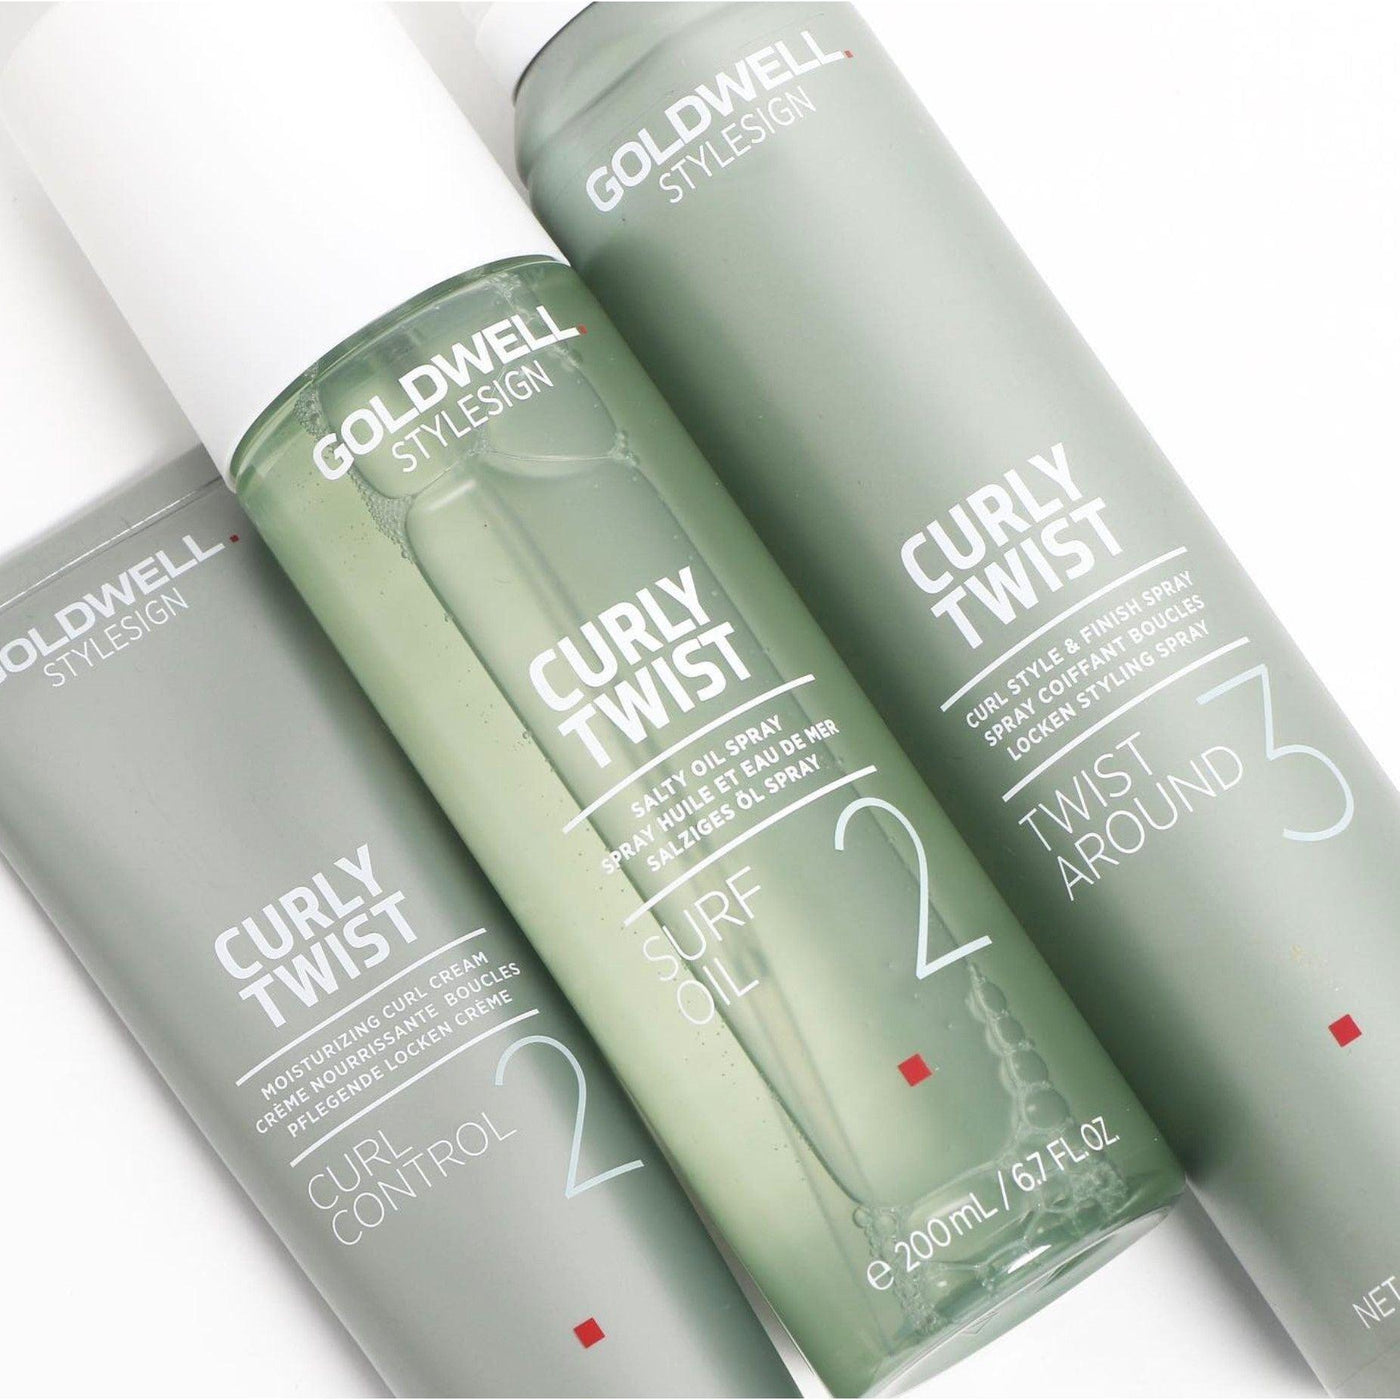 Goldwell Curly Twist Twist Around Curl Styling Spray Goldwell Boutique Deauville